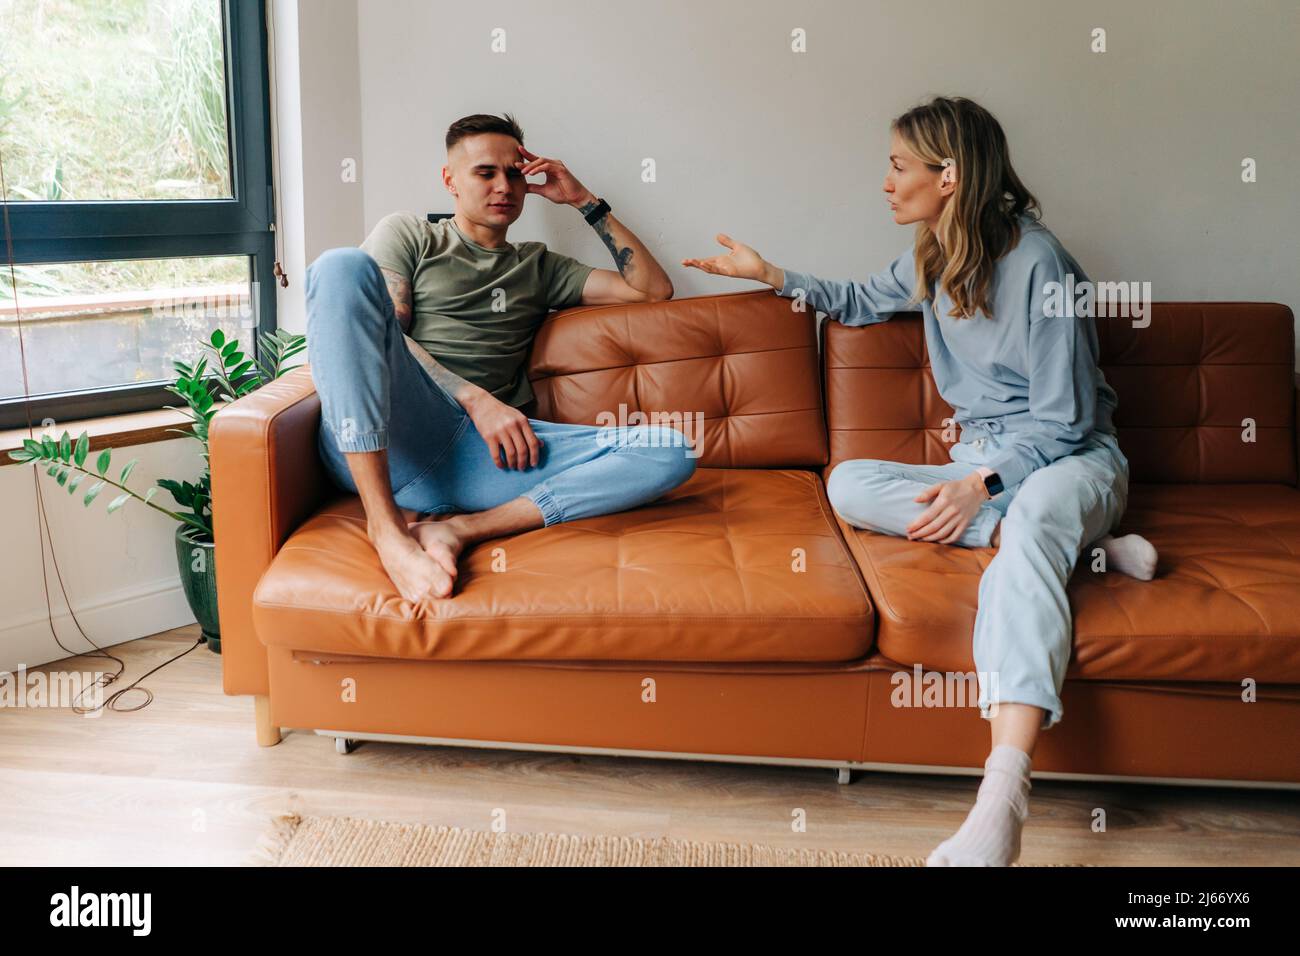 Young woman quarreling with her boyfriend, relationship problems. Stock Photo